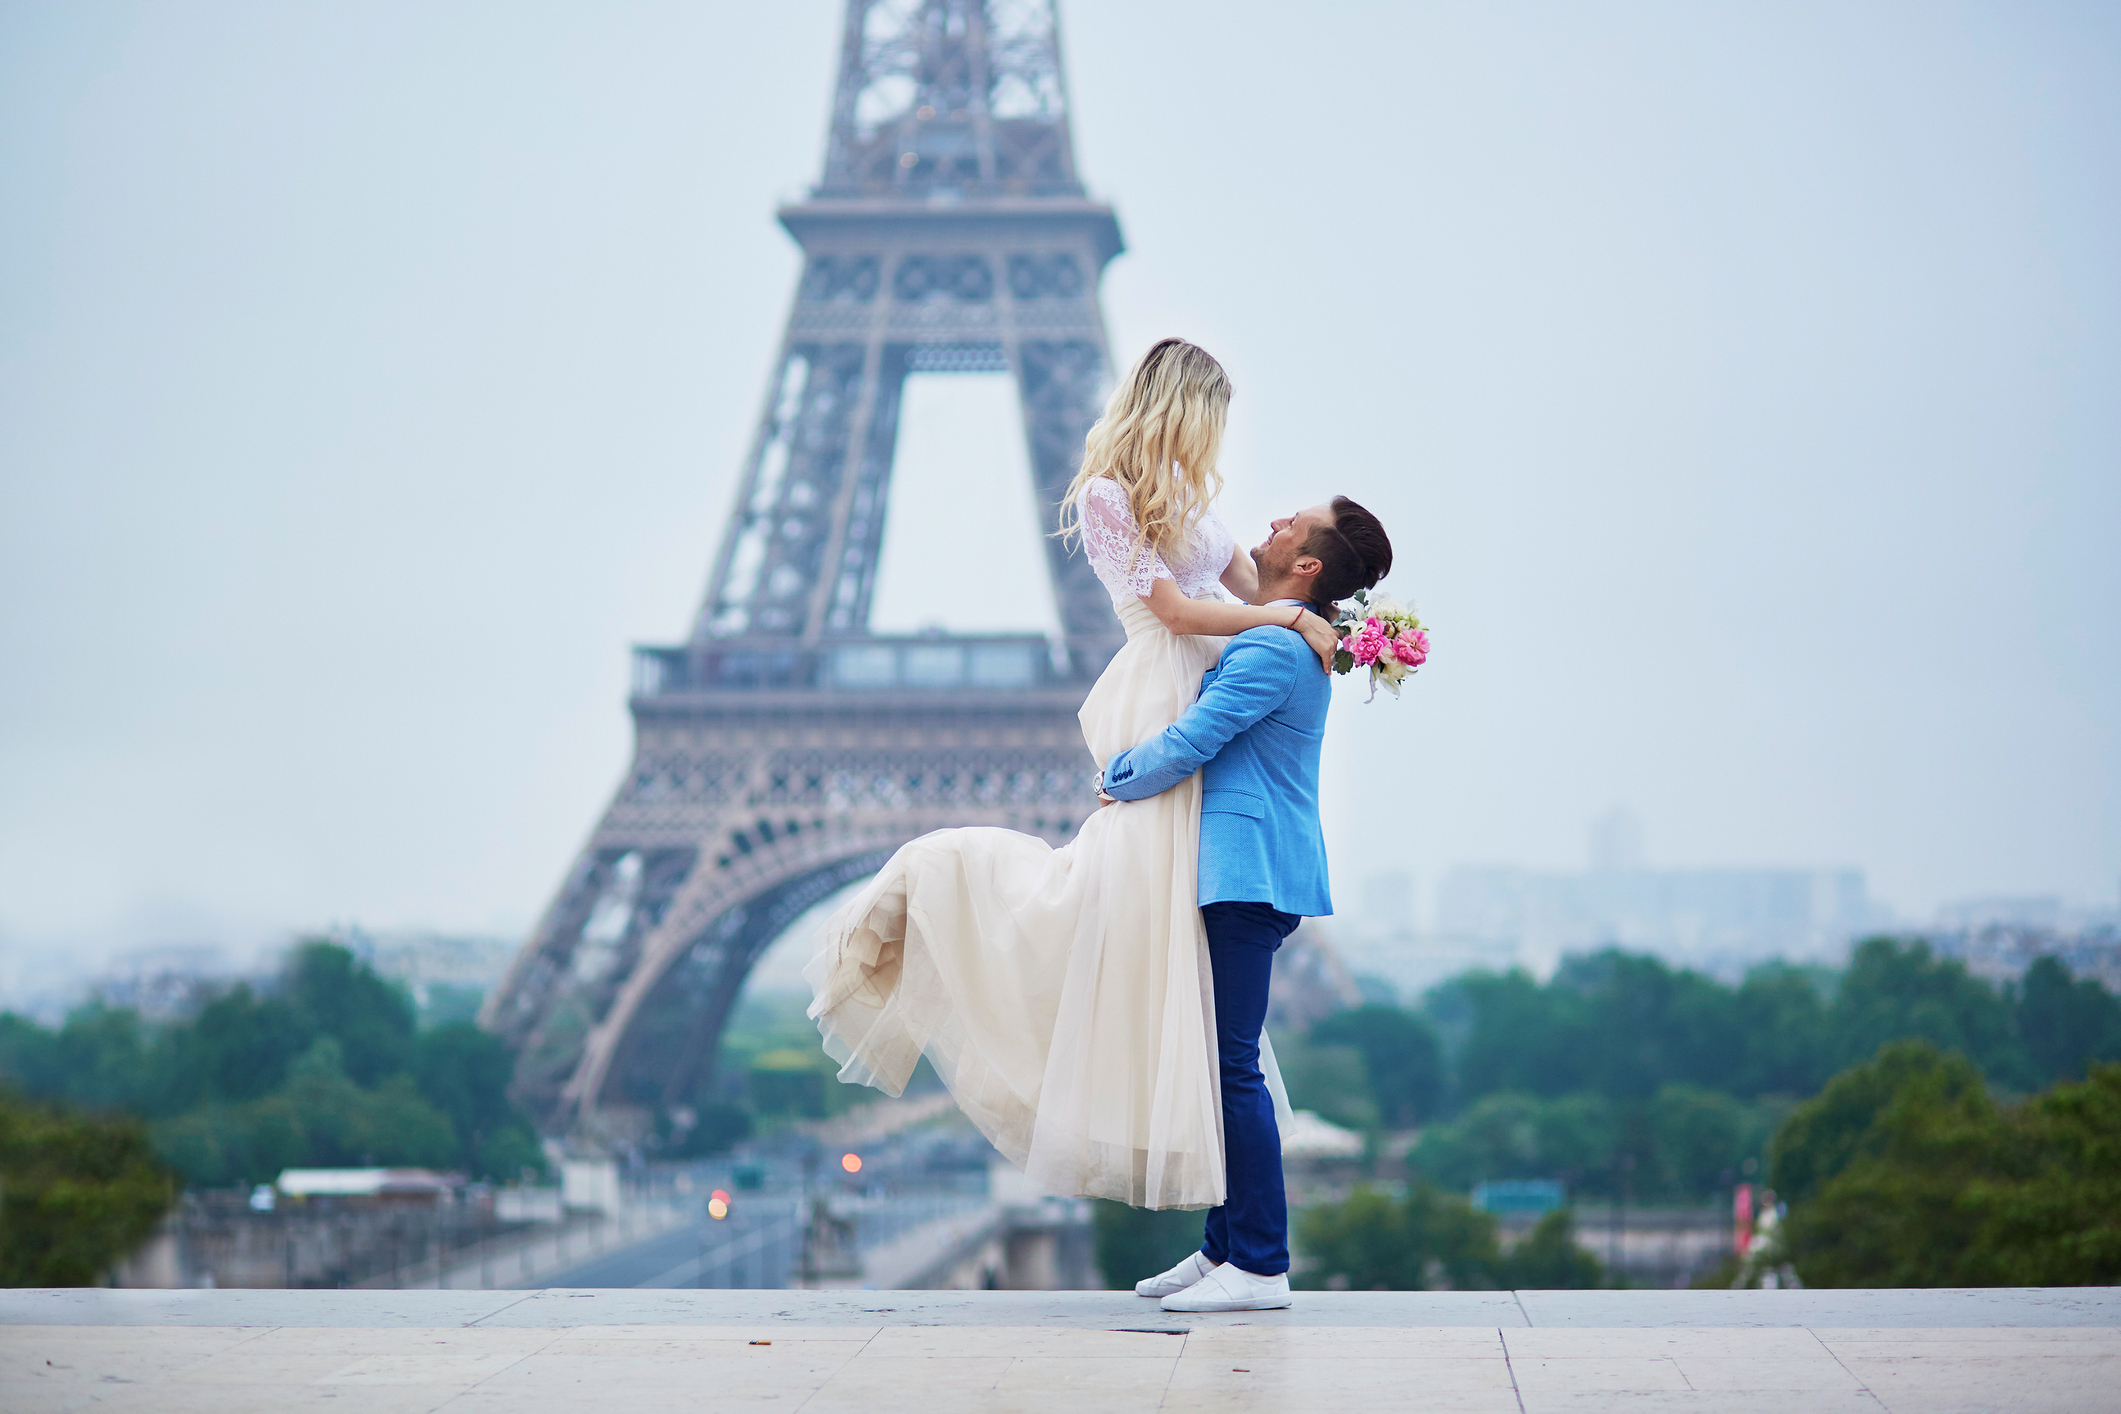 How Can We Get Married in France?